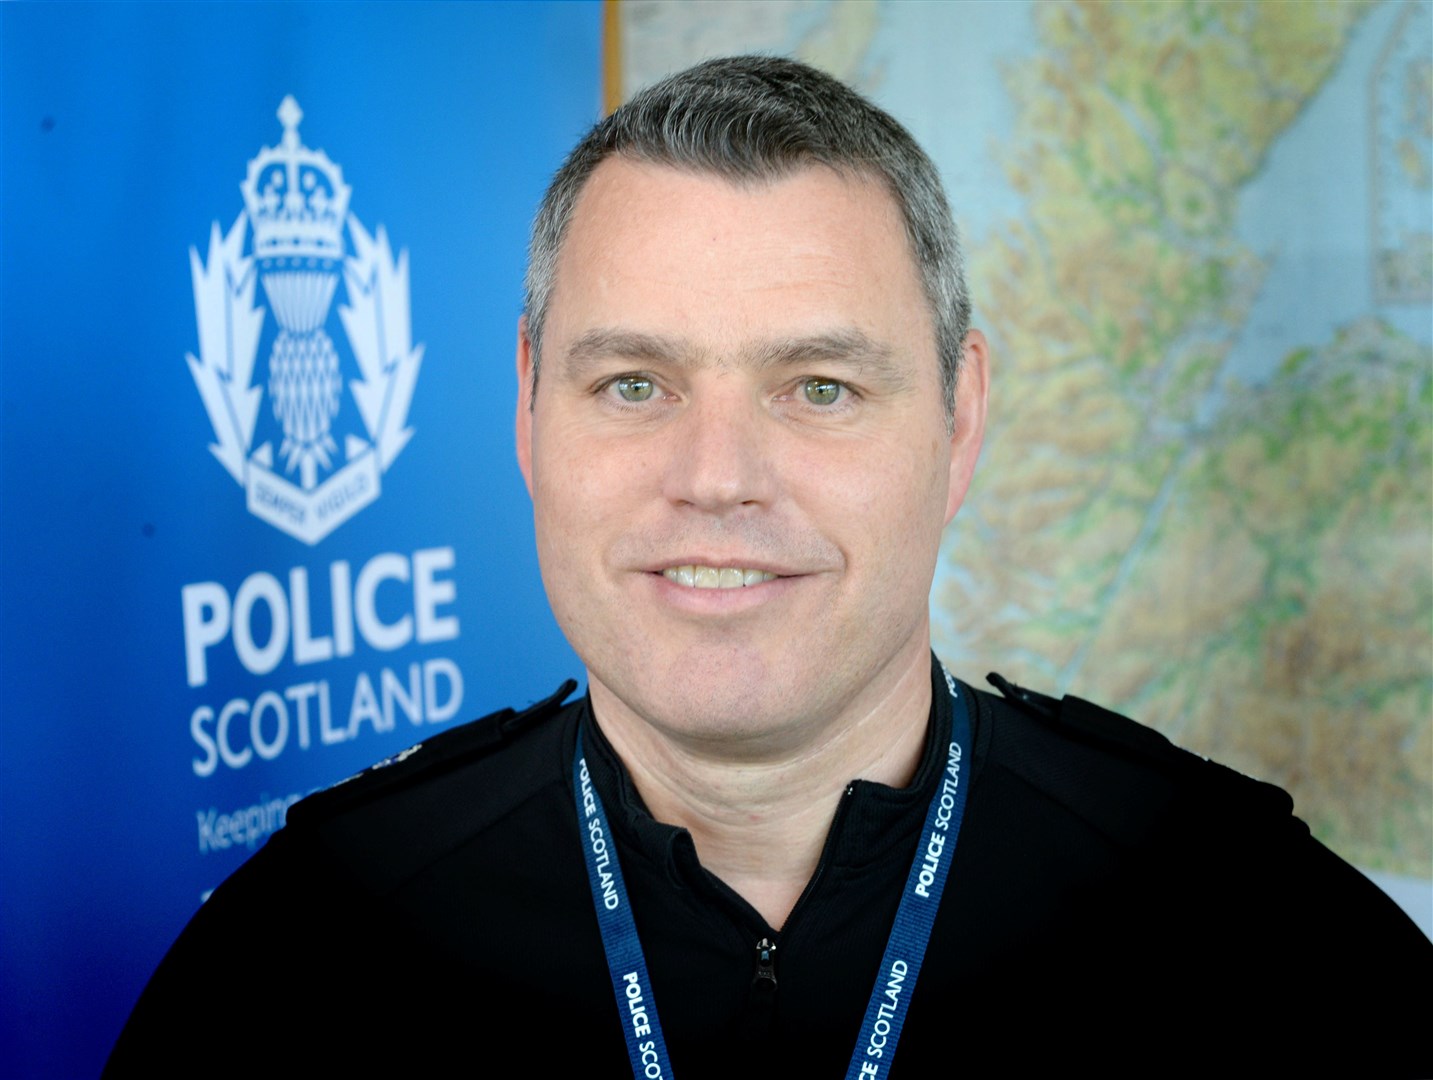 Chief Supt Conrad Trickett: “The Highlands and Islands area continues to be one of the safest places to live in Scotland, but we are not immune to issues faced elsewhere.” Picture: James Mackenzie